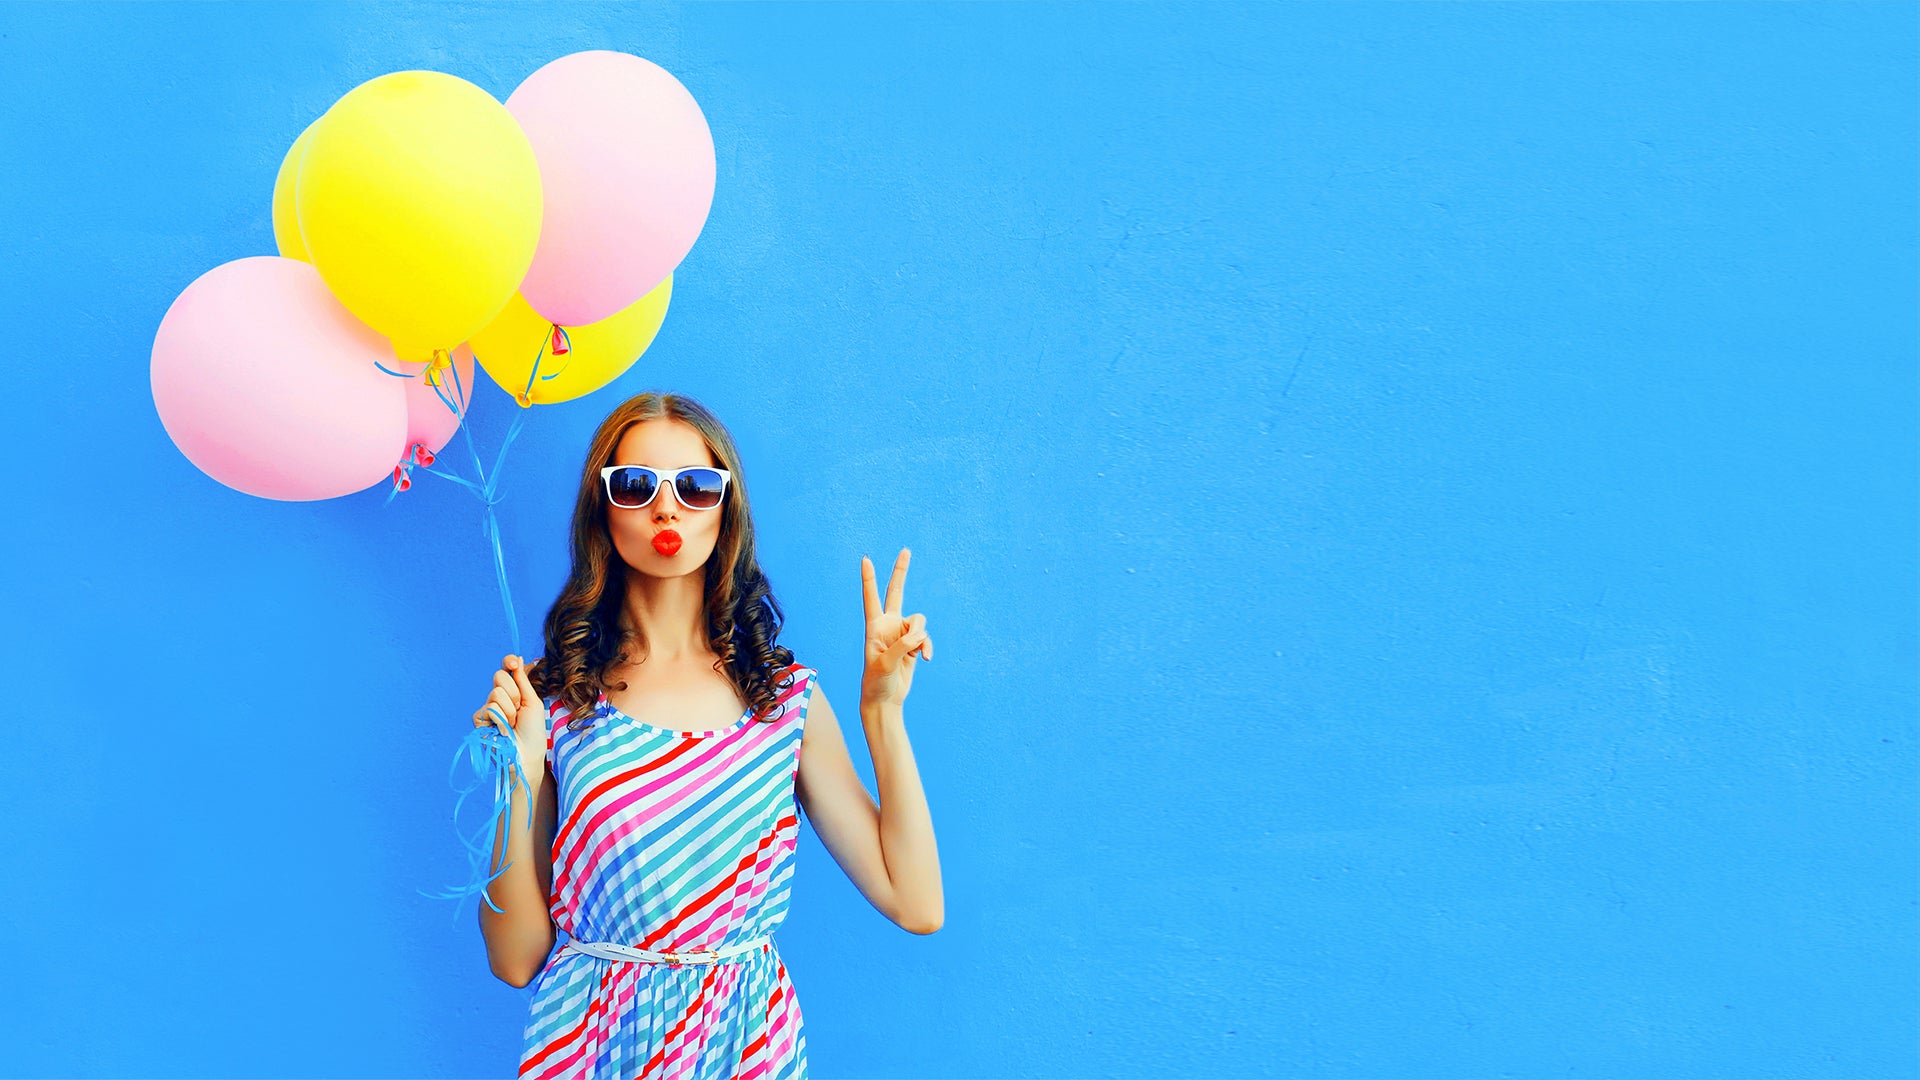 Woman holding colorful balloons against blue wall